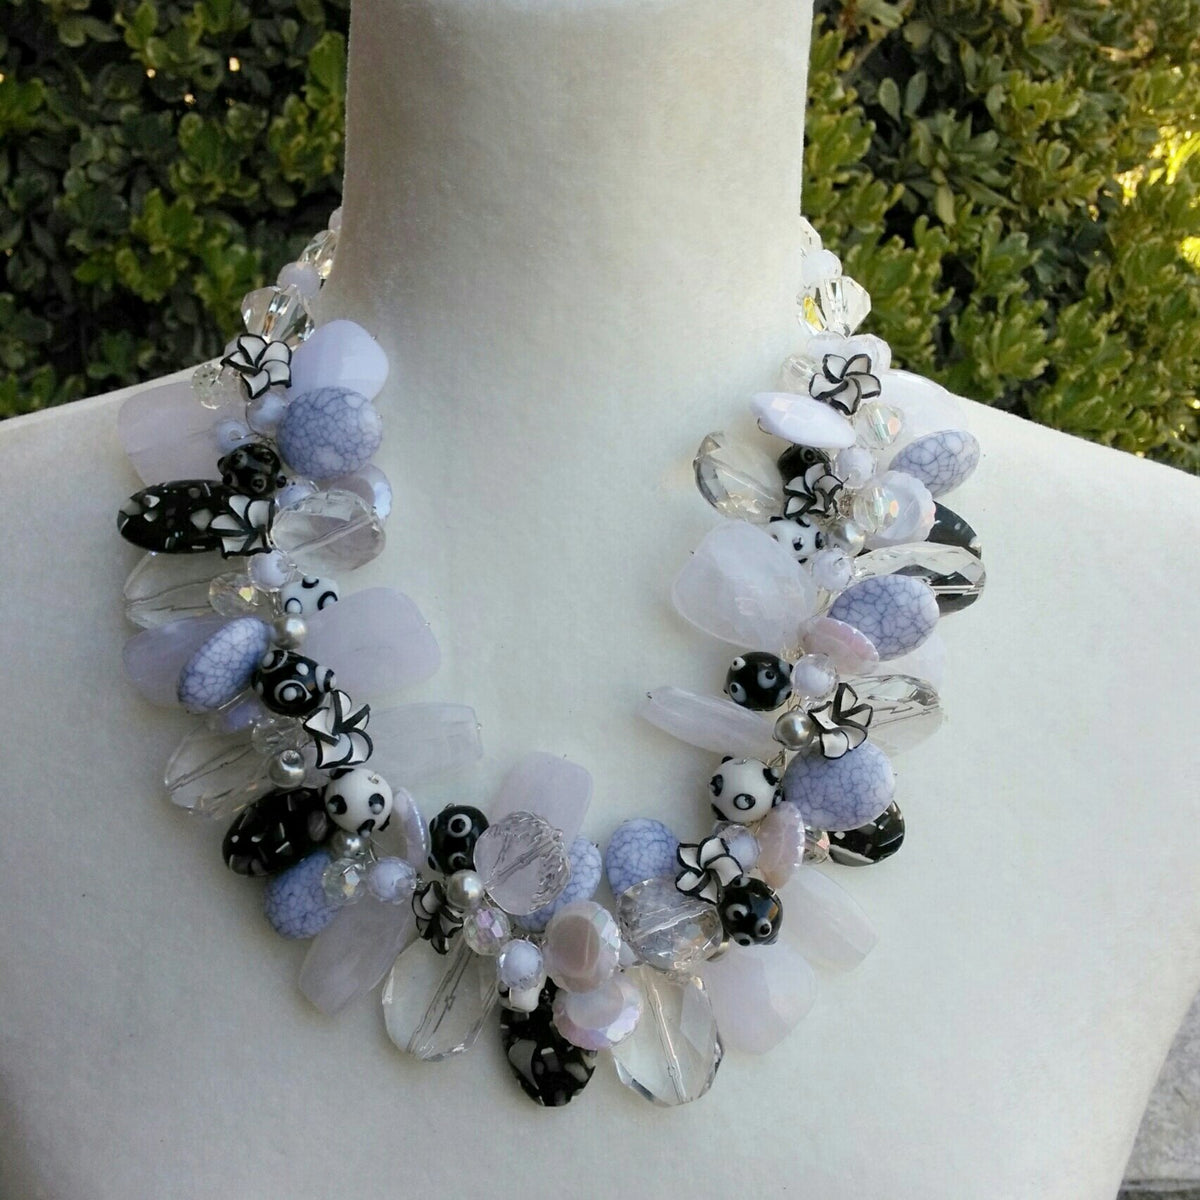 White & Black Chunky Statement Necklace, Unique OOAK Statement Collar, Great Gift for Her